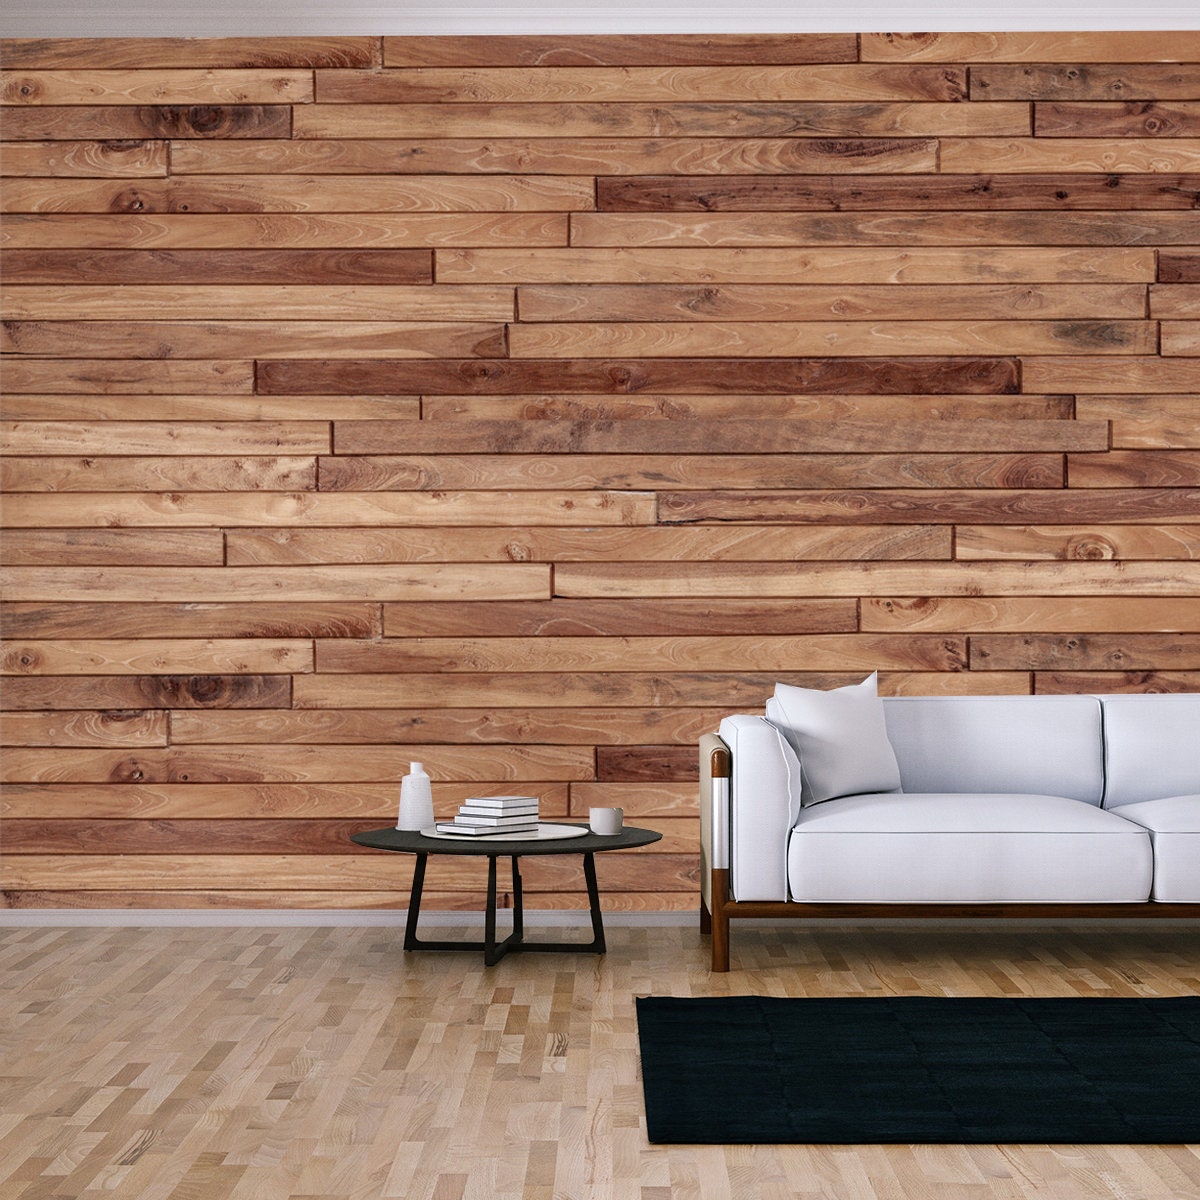 Panorama Wood Wall Texture, Wooden Background, Beautiful Abstract Wallpaper Living Room Mural